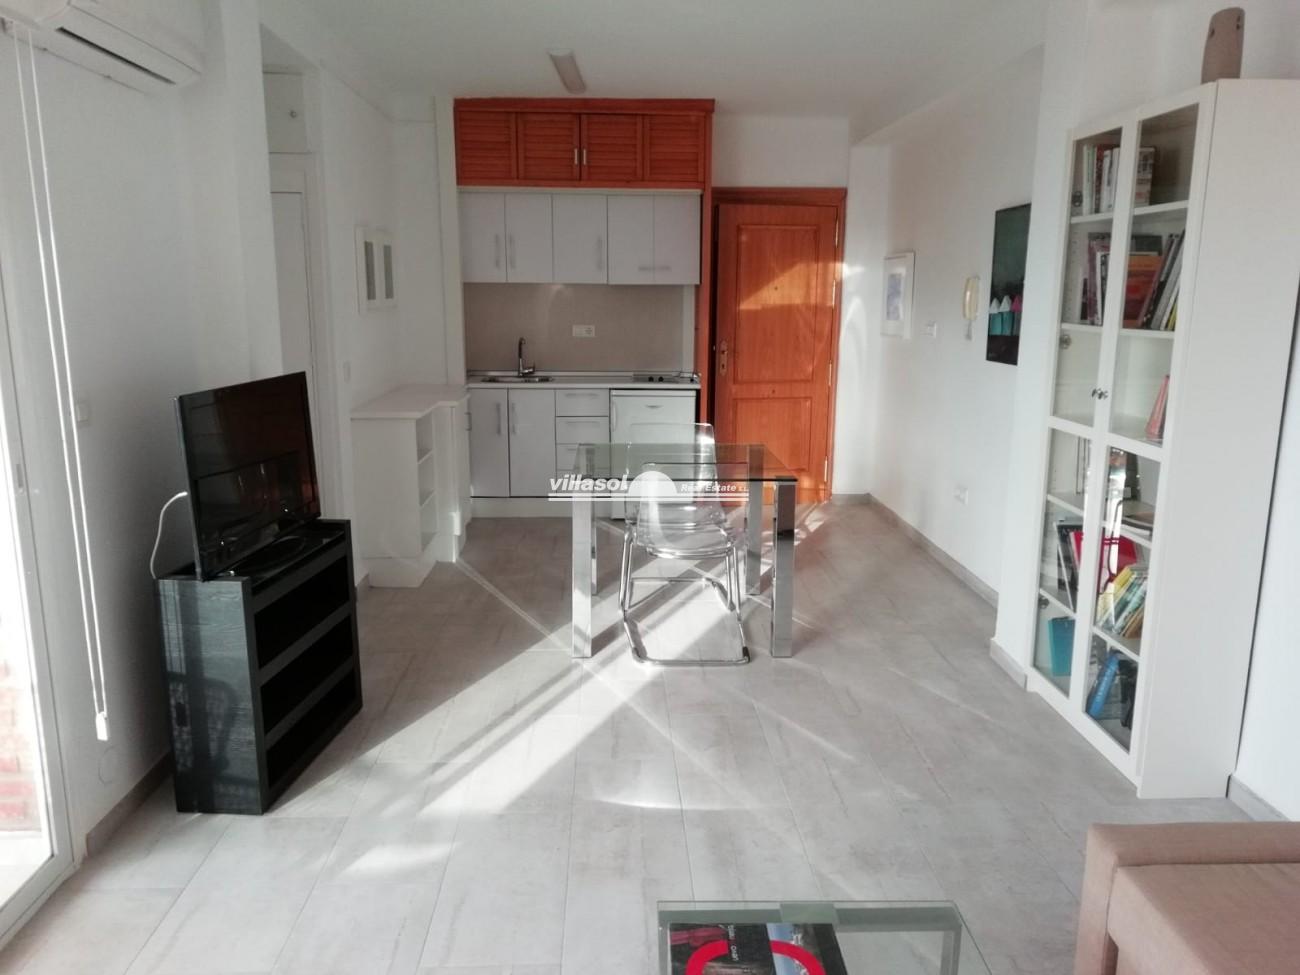 A renovated and delightful light studio apartment for sale in Torrox Costa with nice views